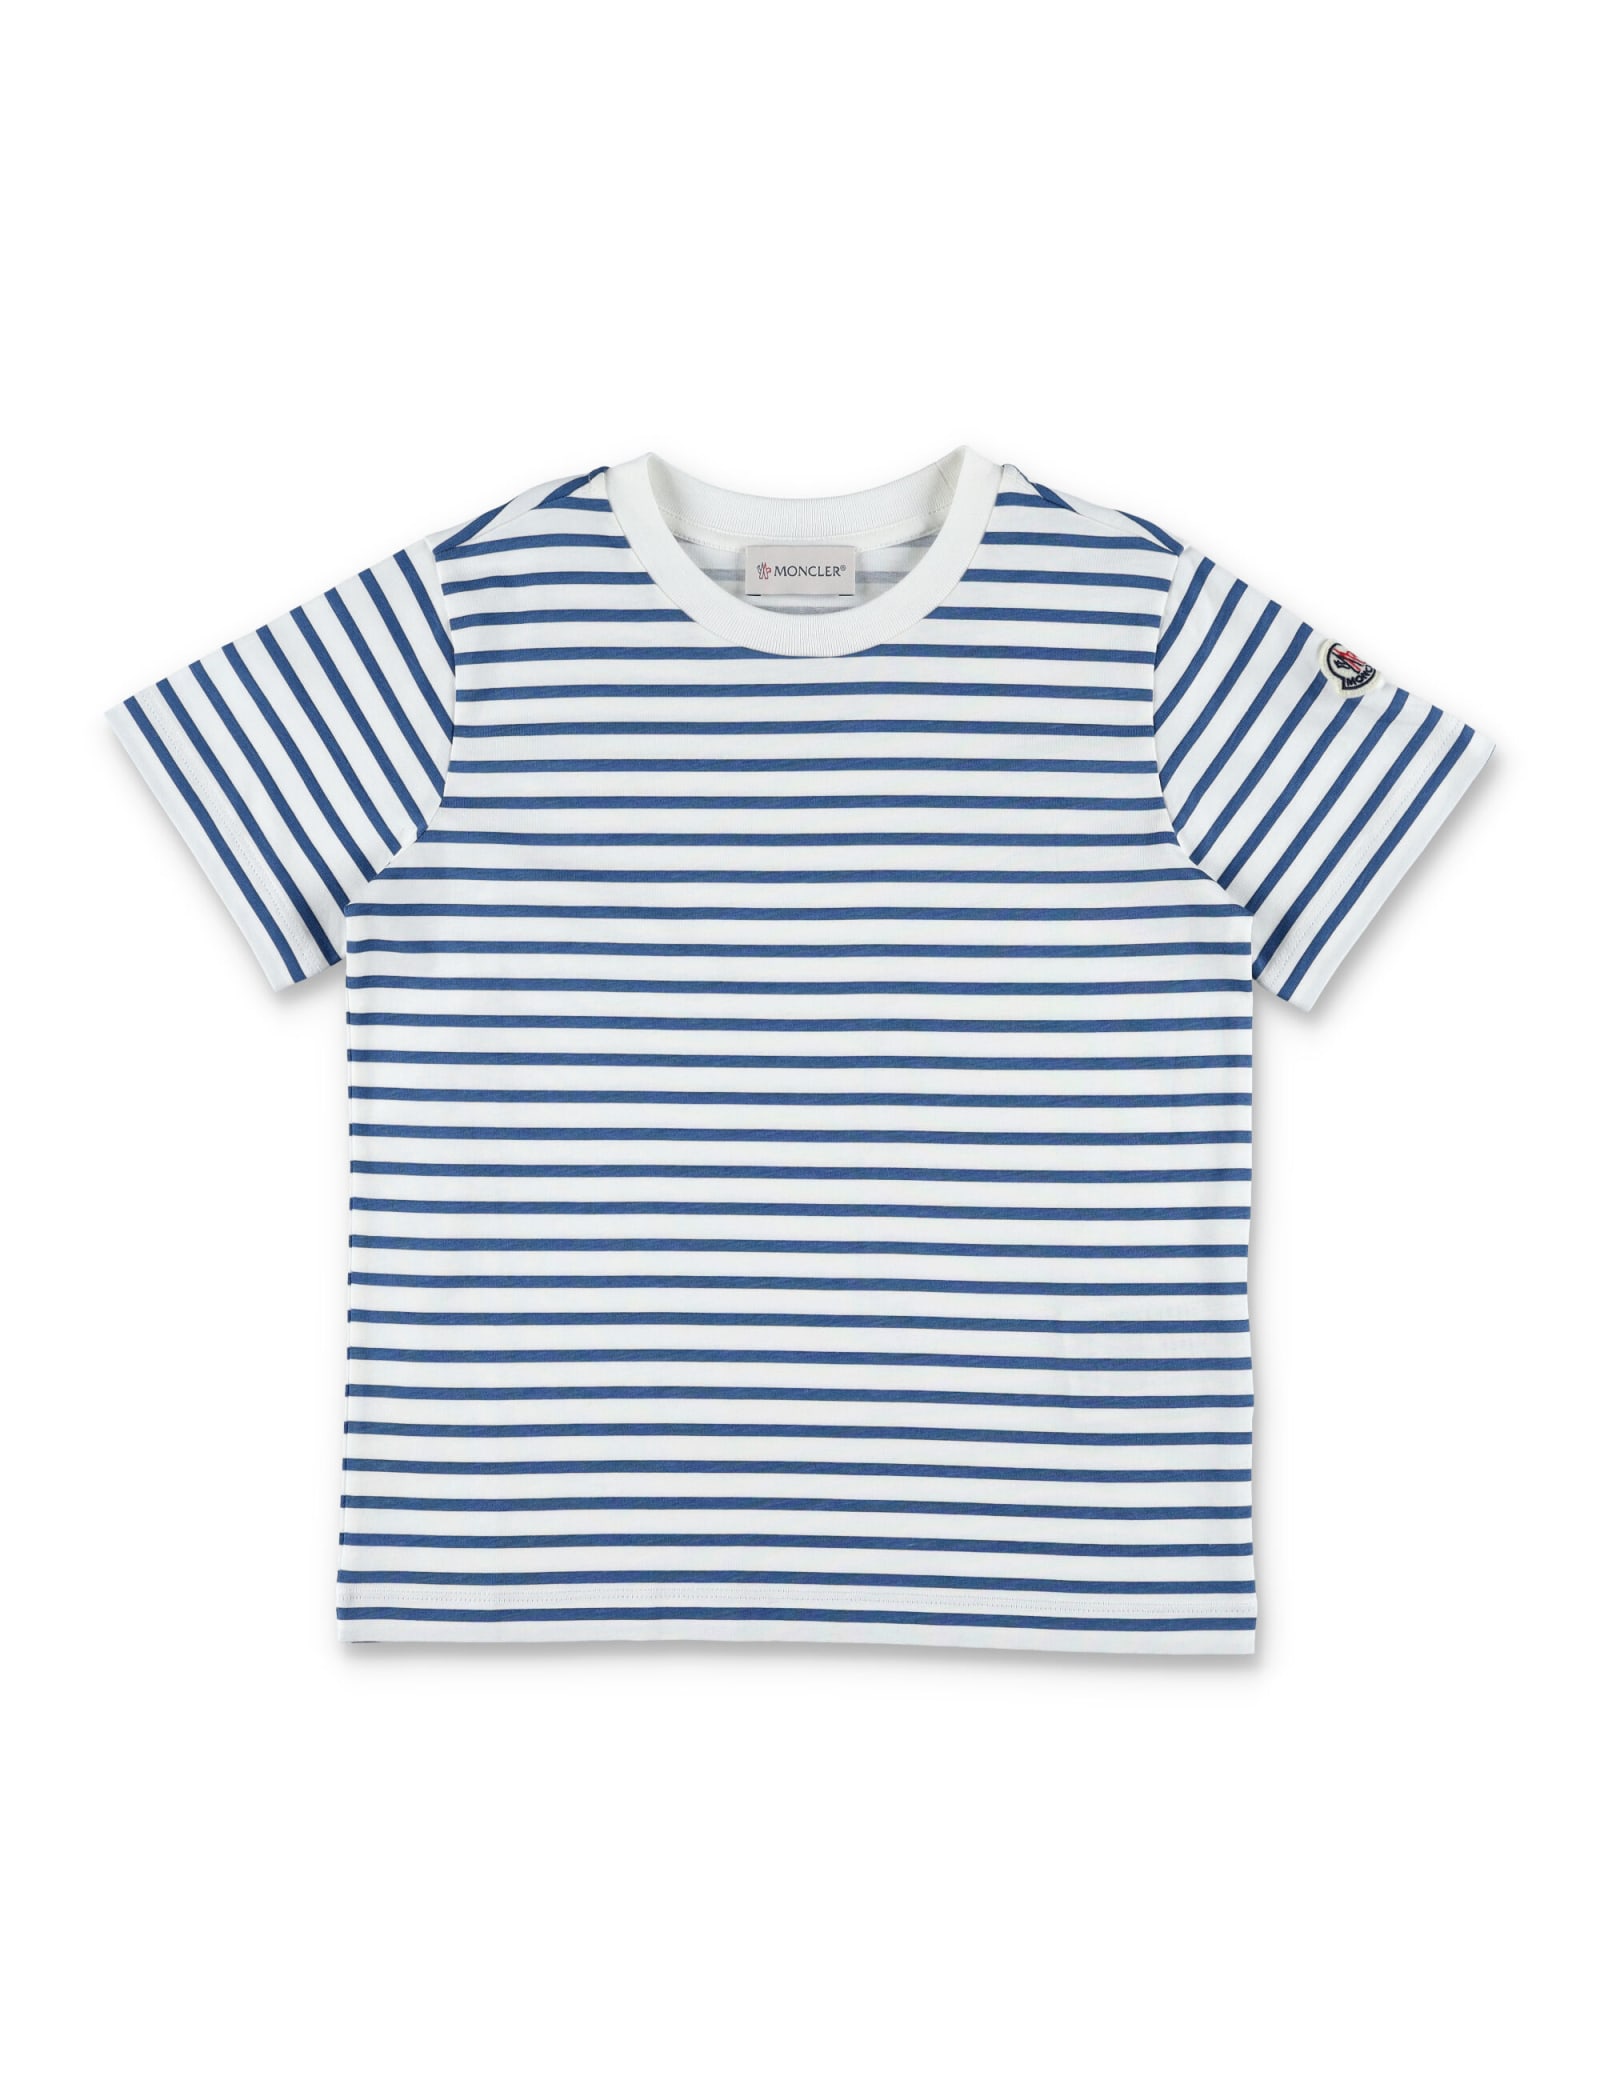 Moncler Kids' Striped T-shirt In Blue/white